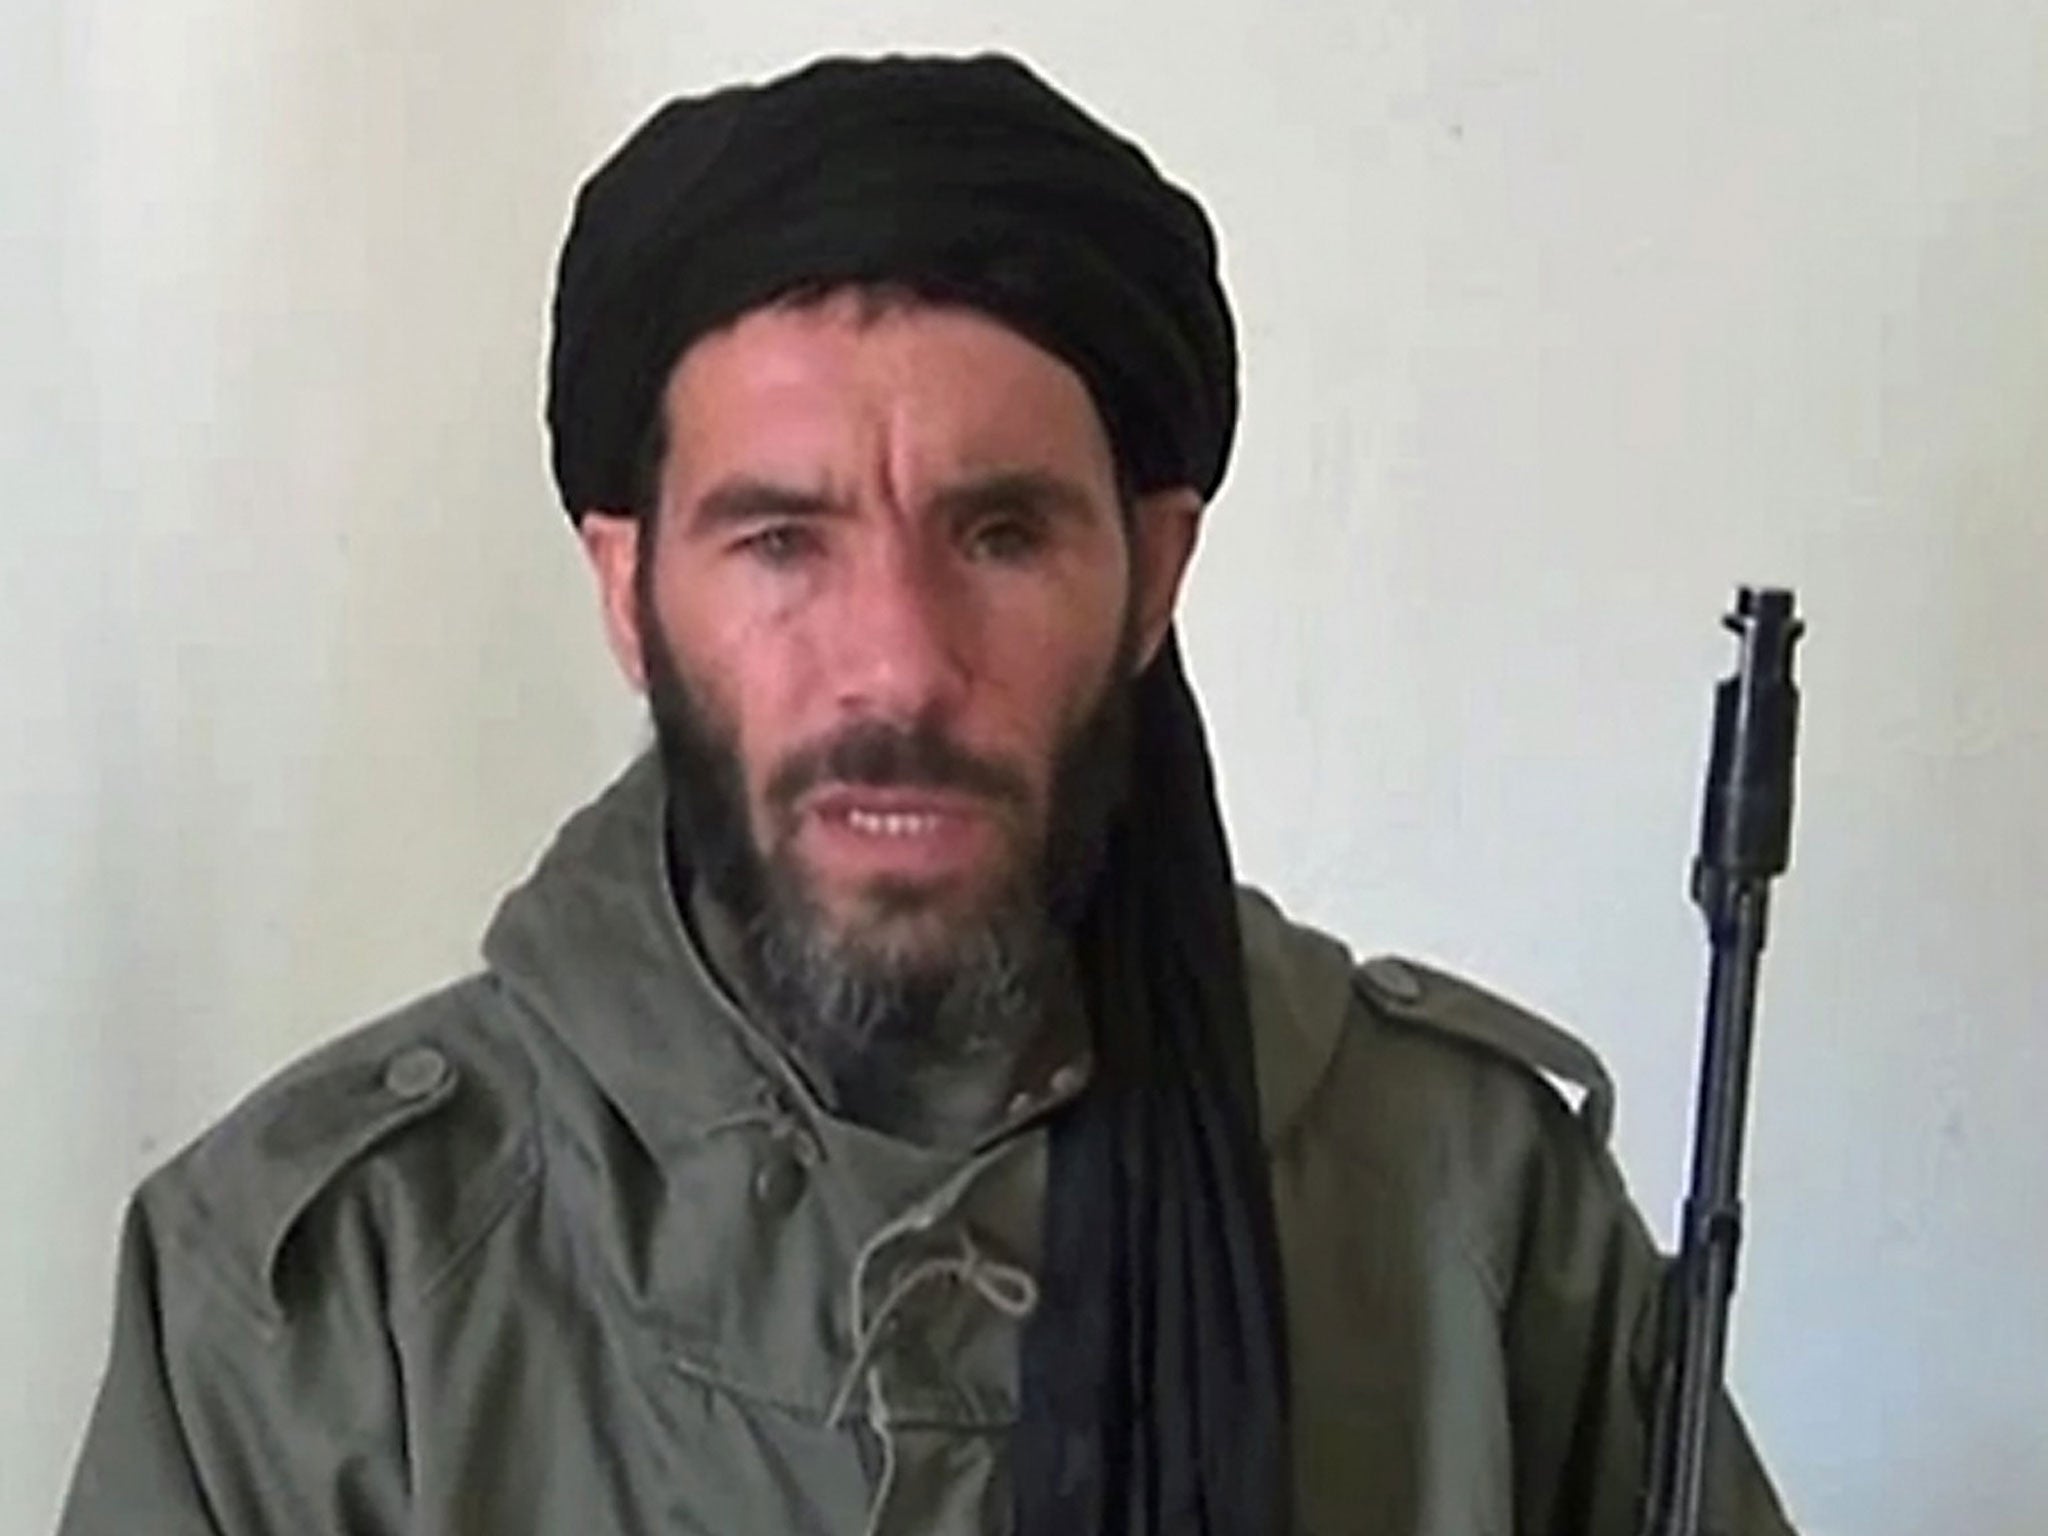 Wanted: Mokhtar Belmokhtar masterminded last week’s raid but it is still unclear if he took part